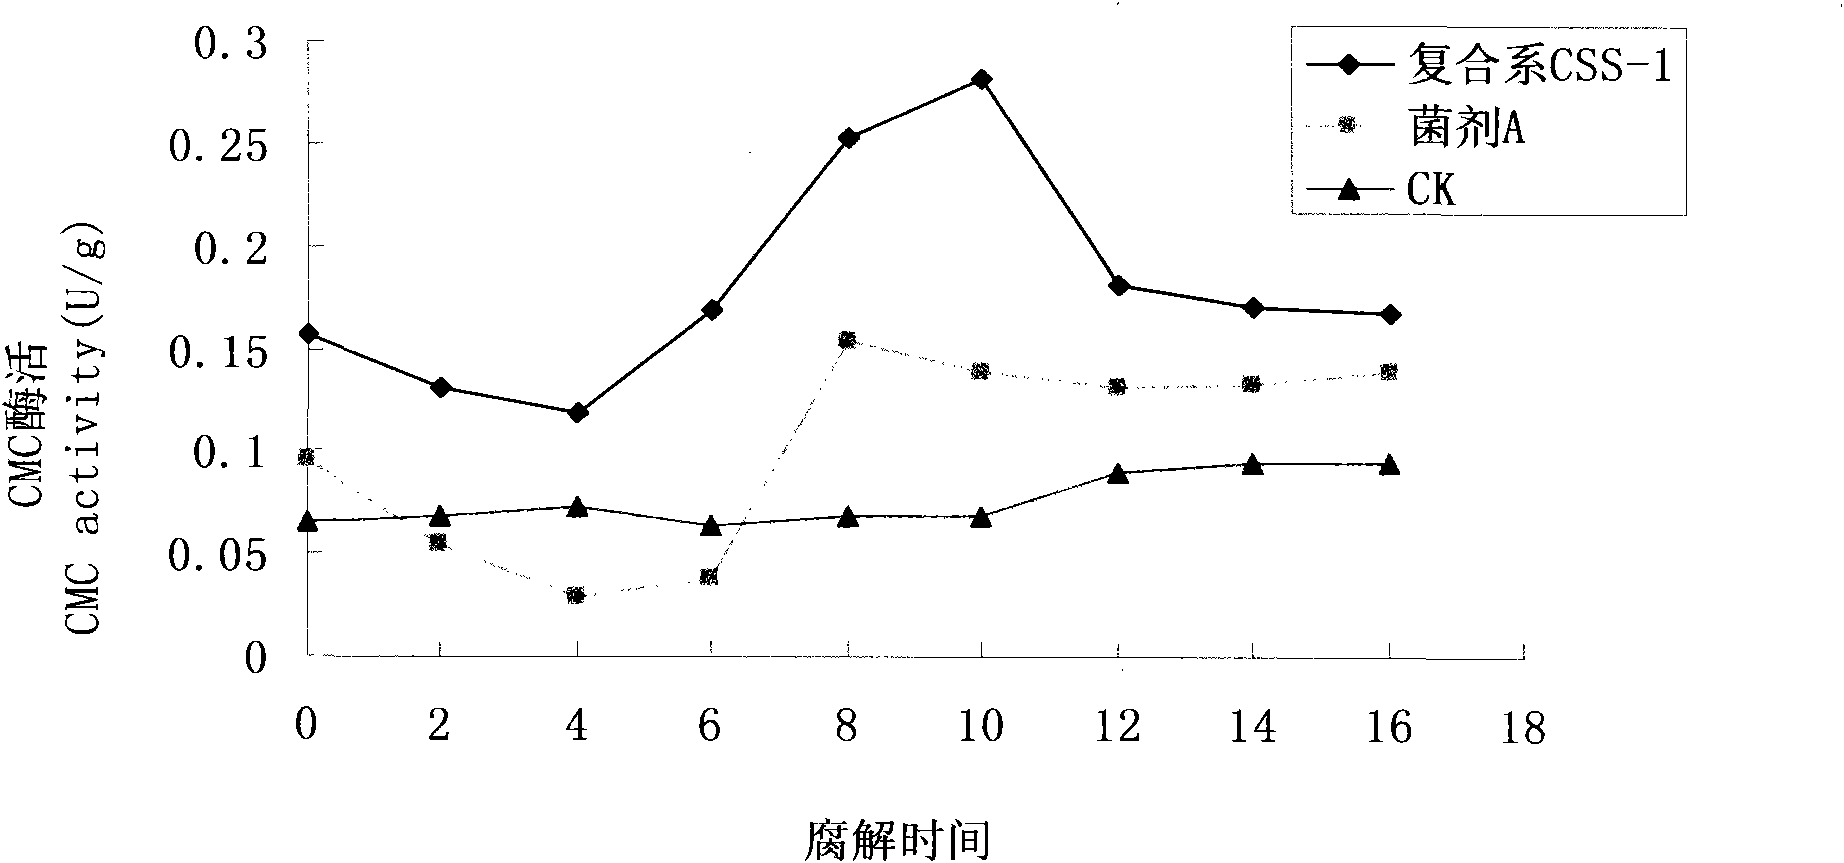 Method for constructing composite bacteria system for decaying maize straws